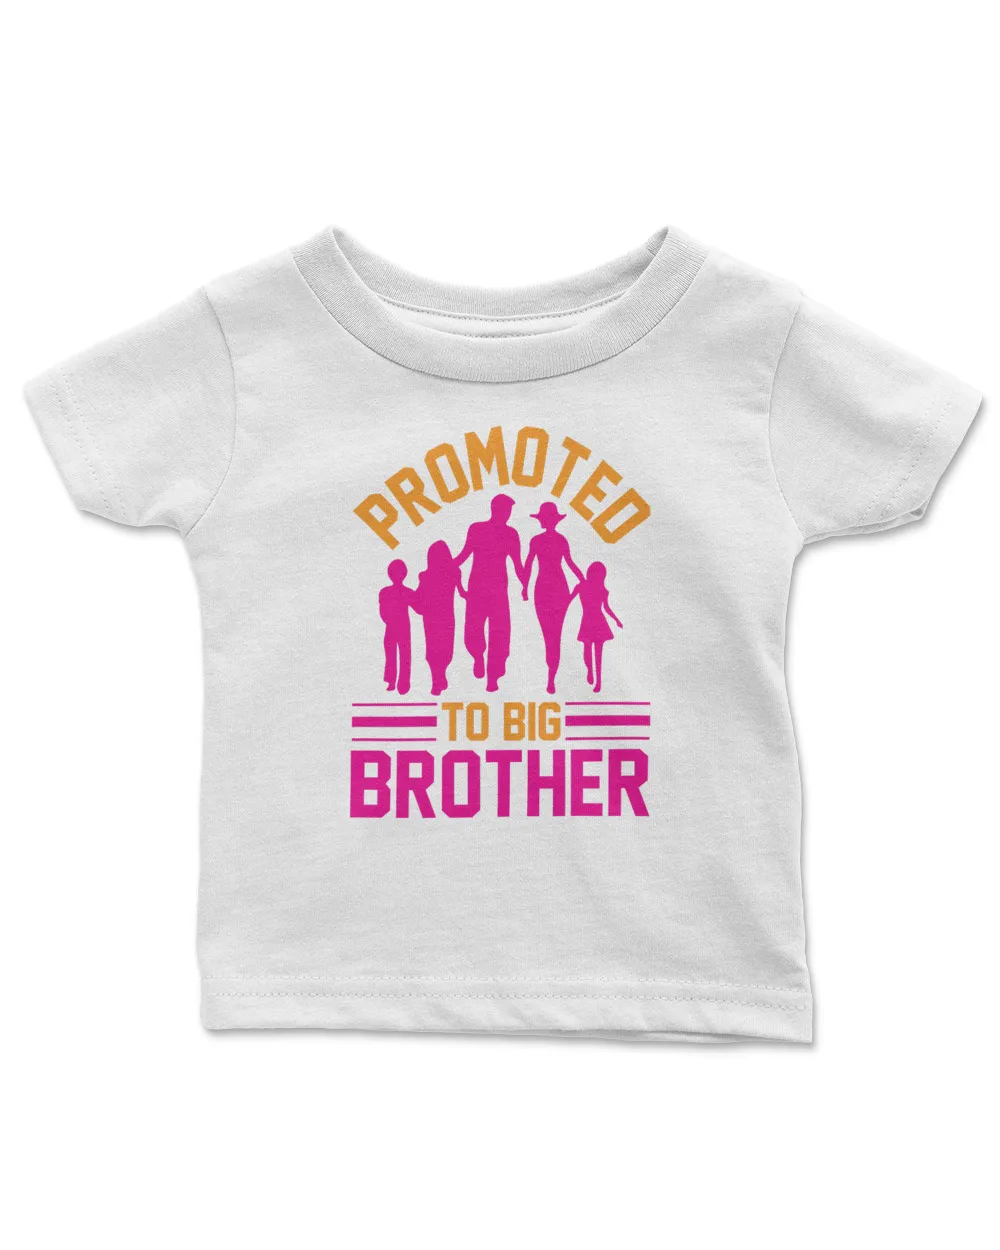 Family T-Shirt, Hoodie, Kids T-Shirt, Toodle & Infant Shirt, Gifts for your Family (37)